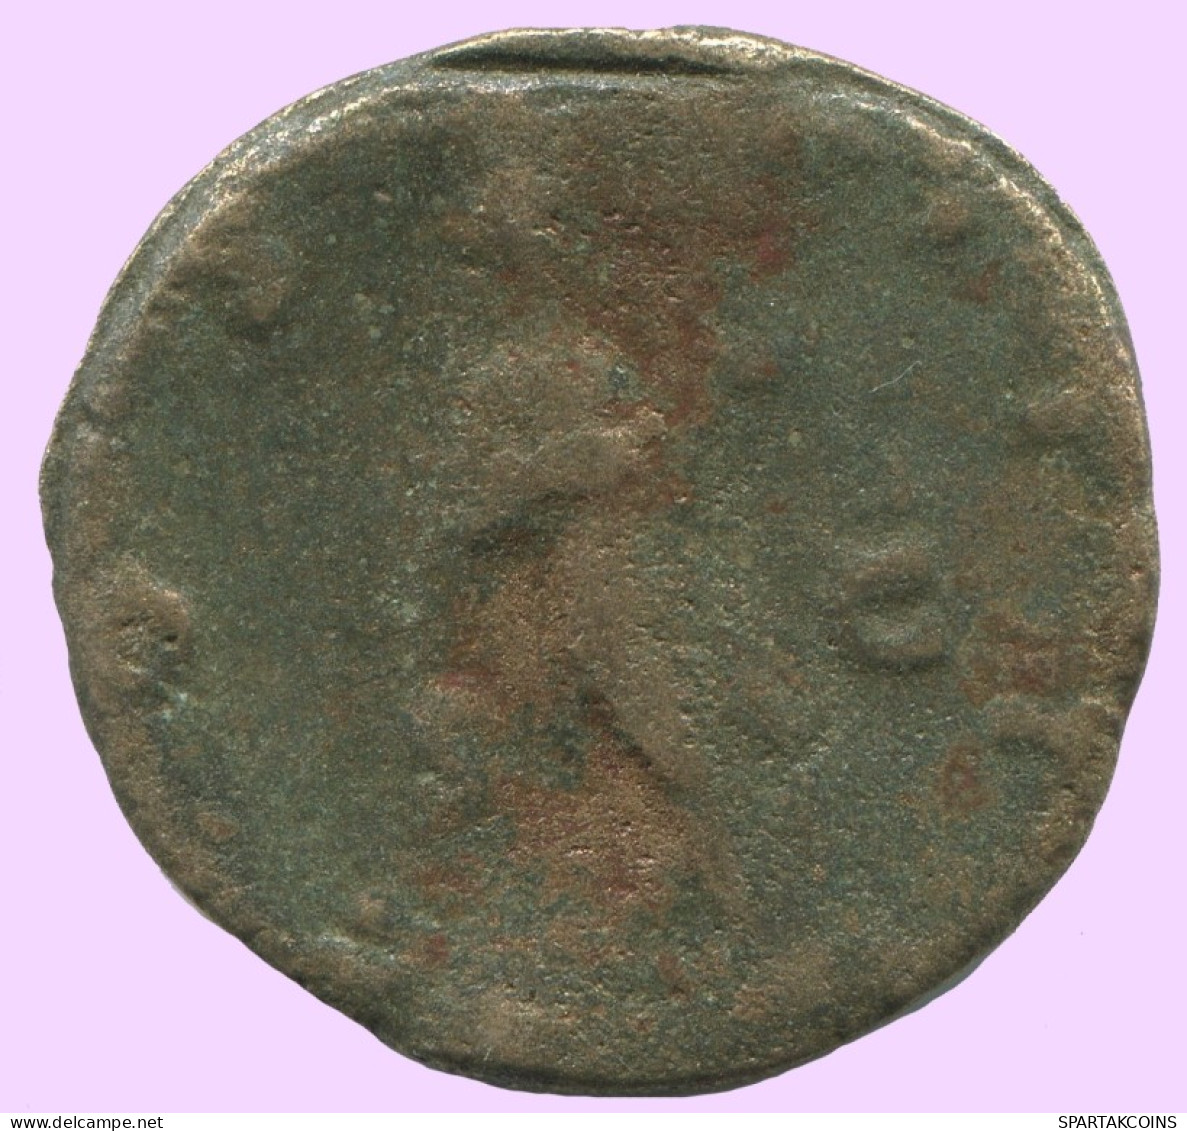 LATE ROMAN EMPIRE Follis Antique Authentique Roman Pièce 4.9g/23mm #ANT2156.7.F.A - The End Of Empire (363 AD To 476 AD)